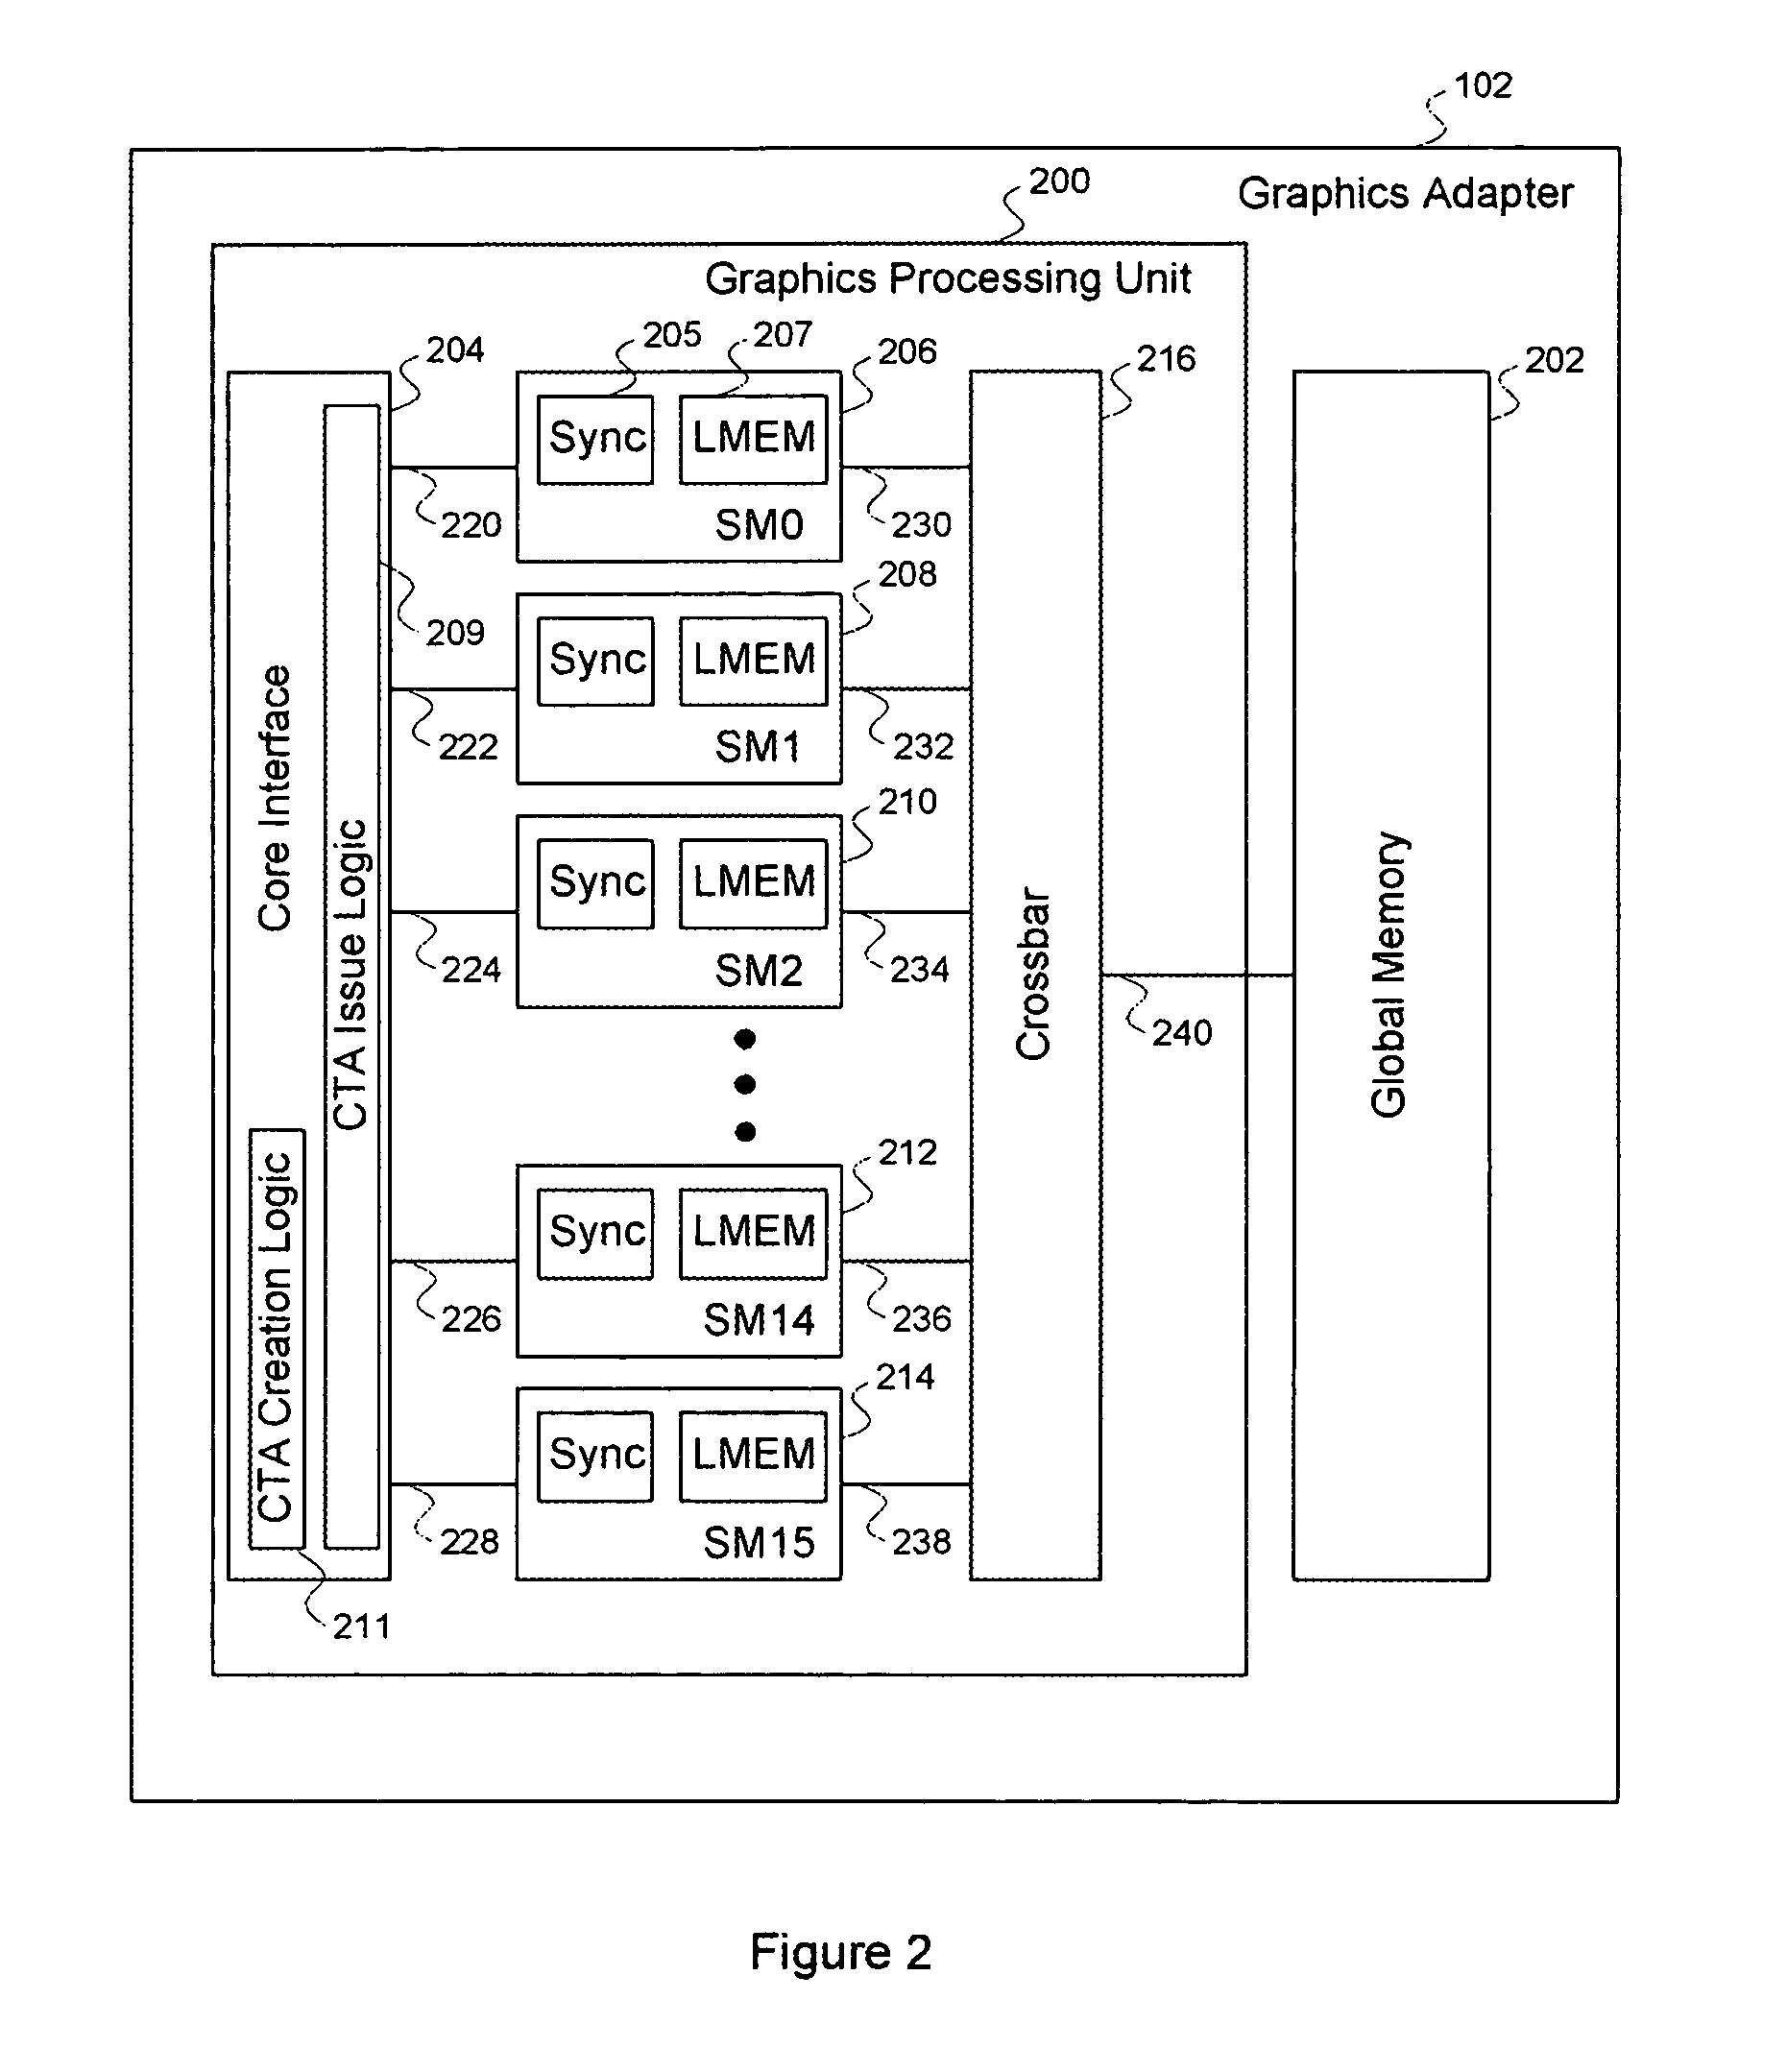 Efficient matrix multiplication on a parallel processing device